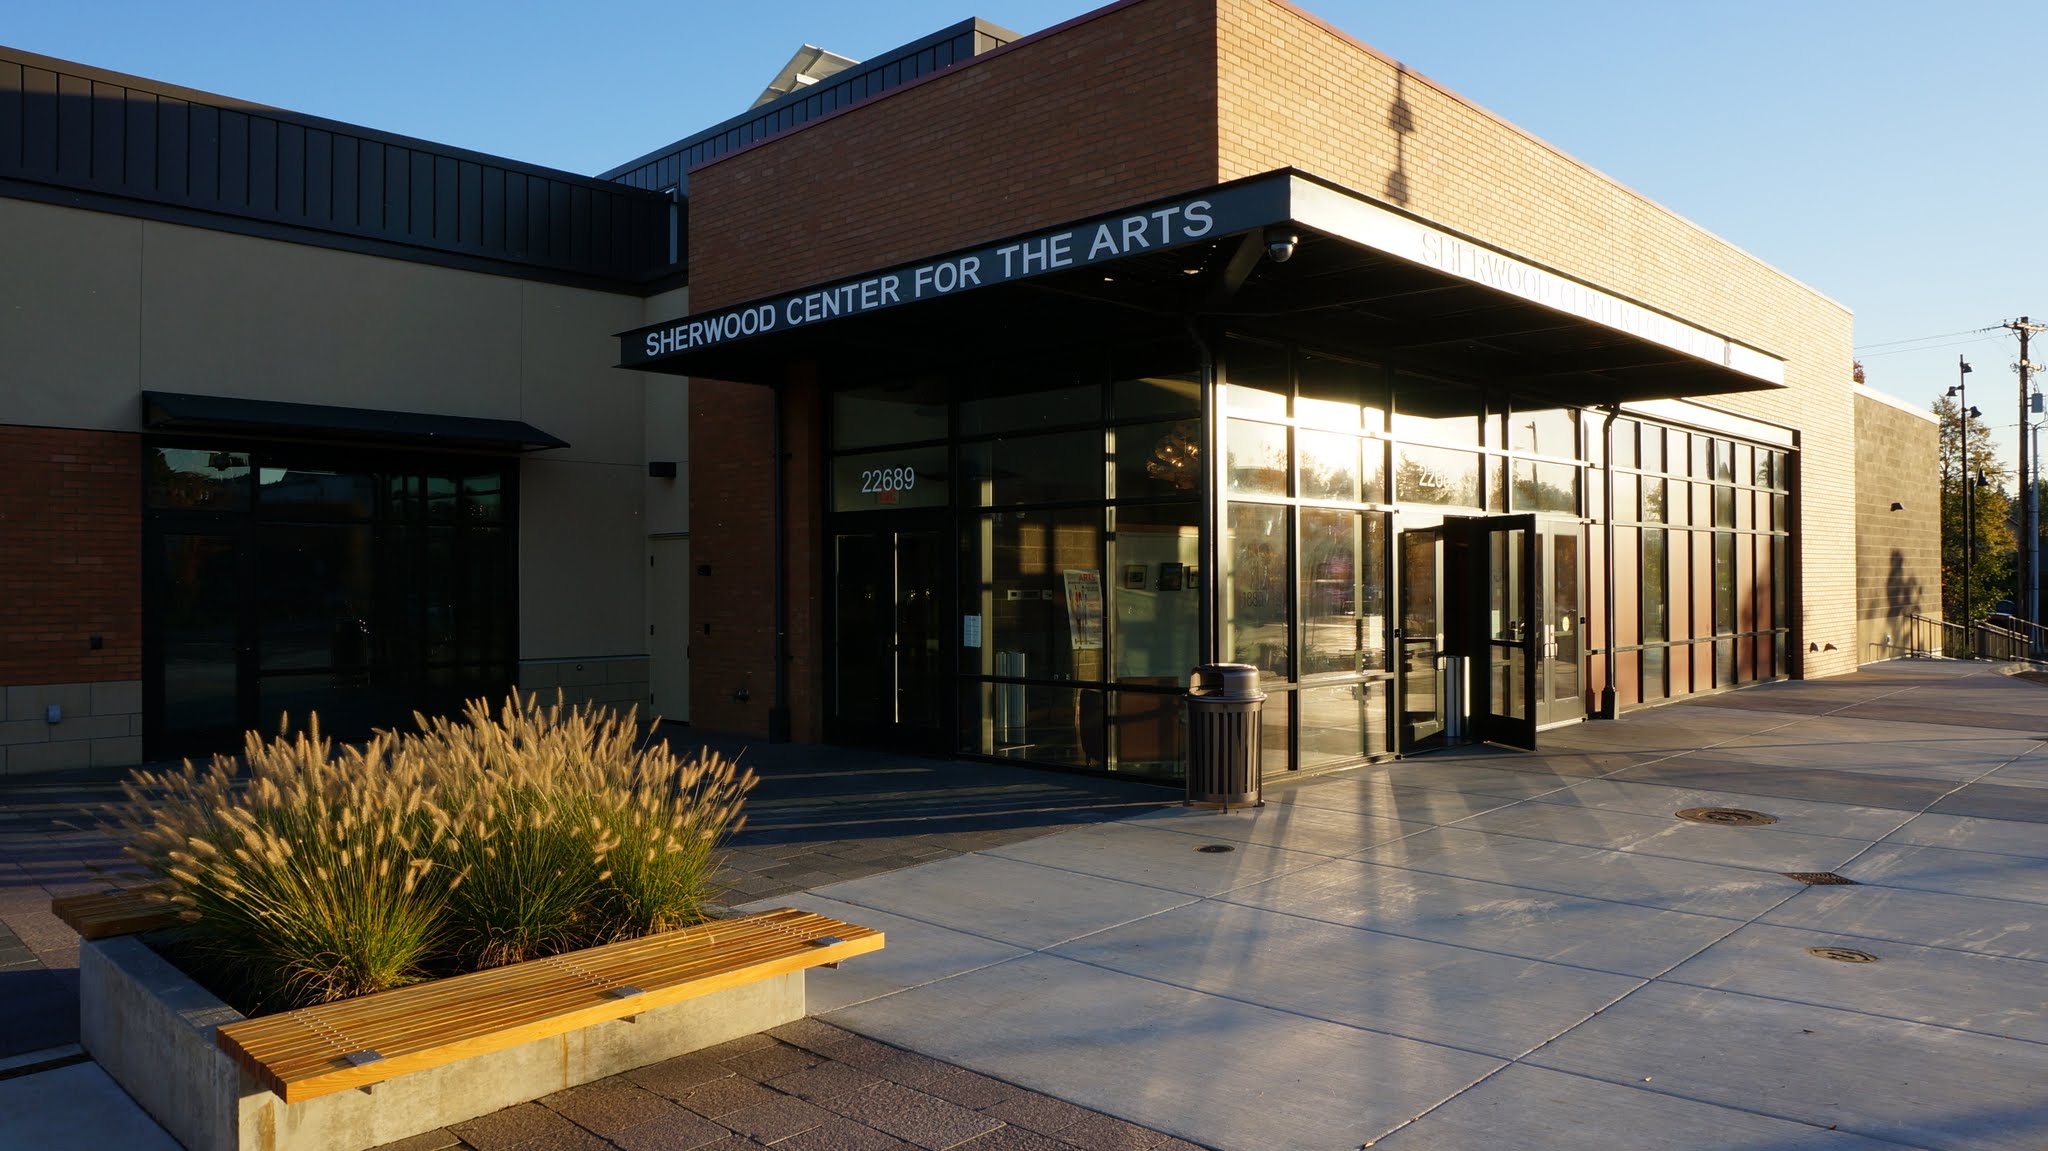 to the Sherwood Center for the Arts Sherwood Center for the Arts